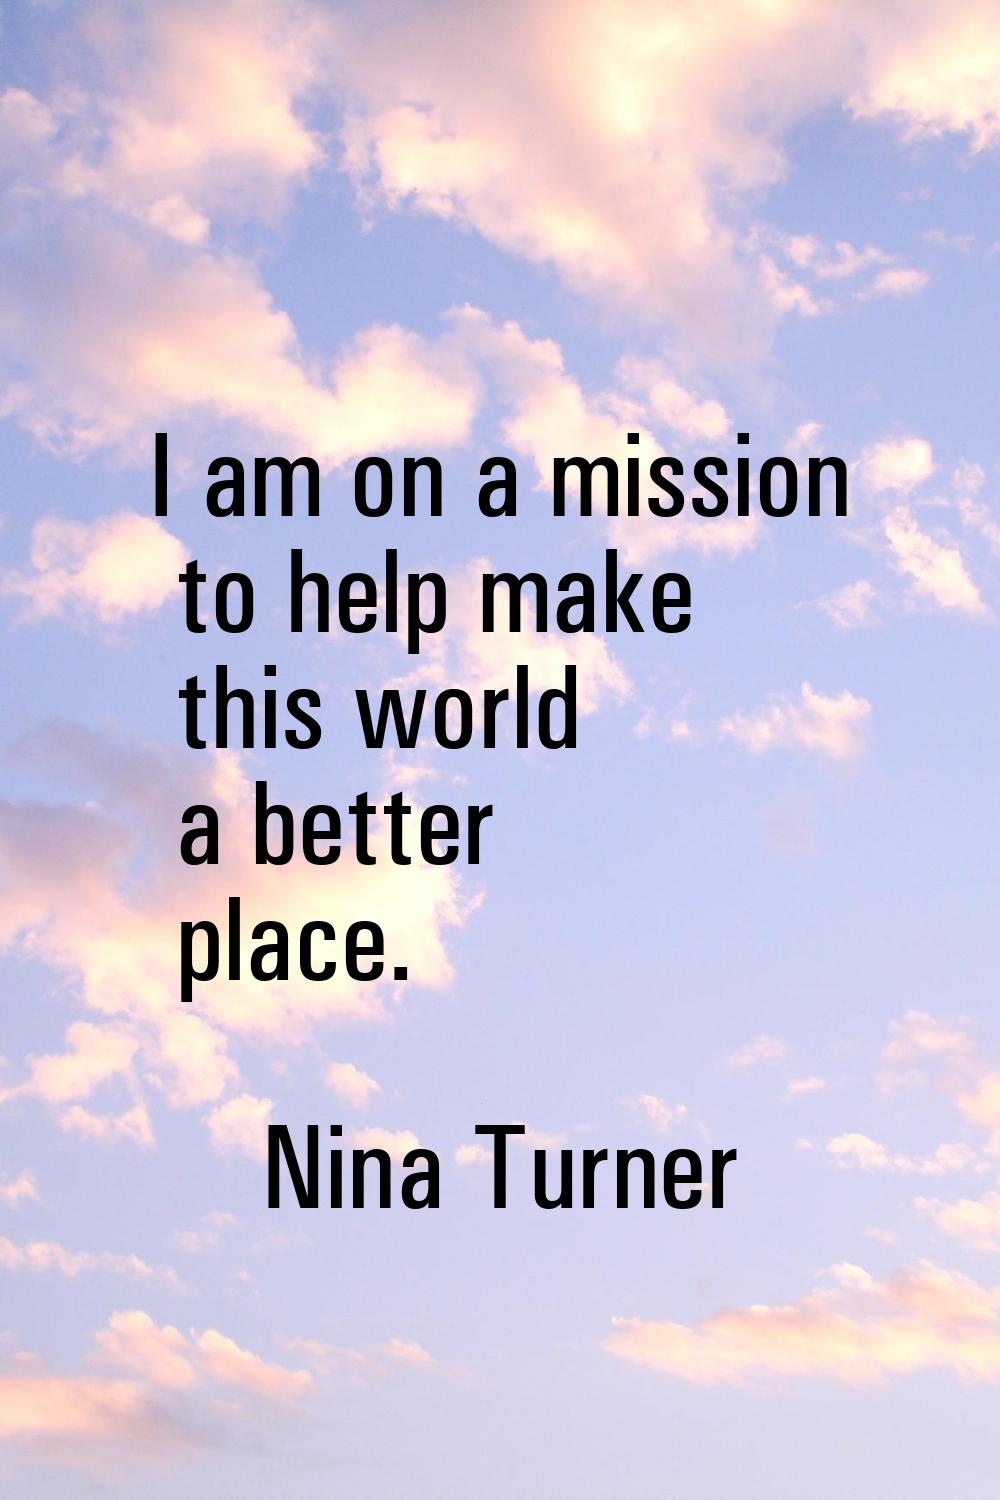 I am on a mission to help make this world a better place.